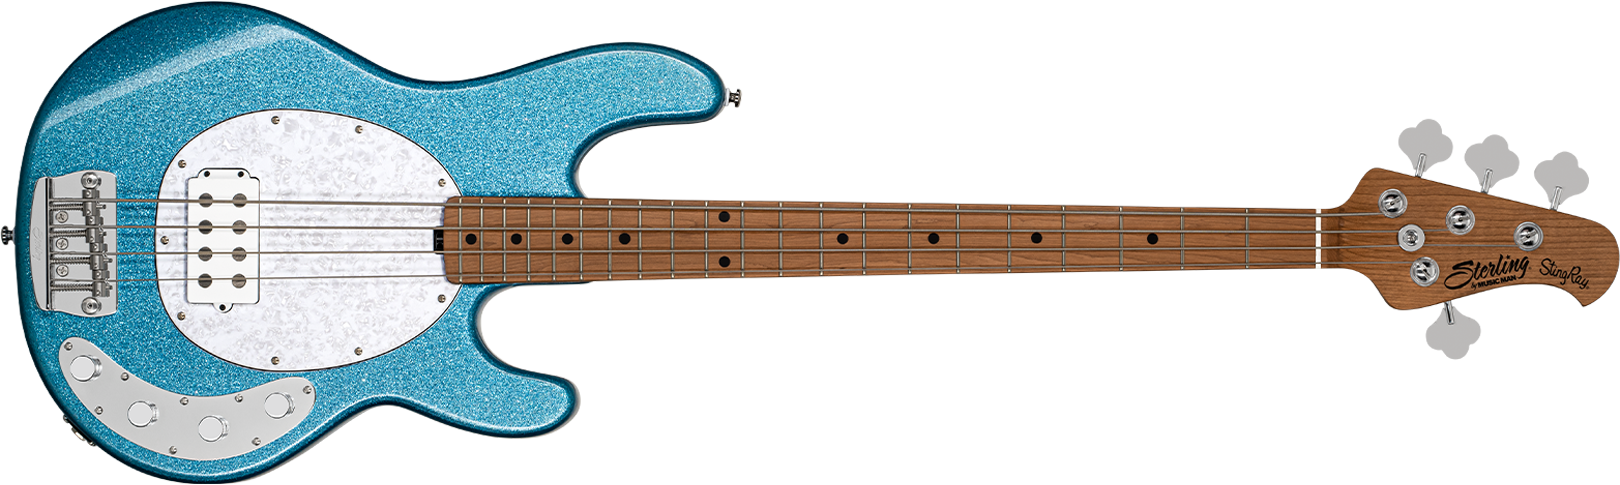 musicman （ミュージックマン） sterling ray34 na-connectedremag.com